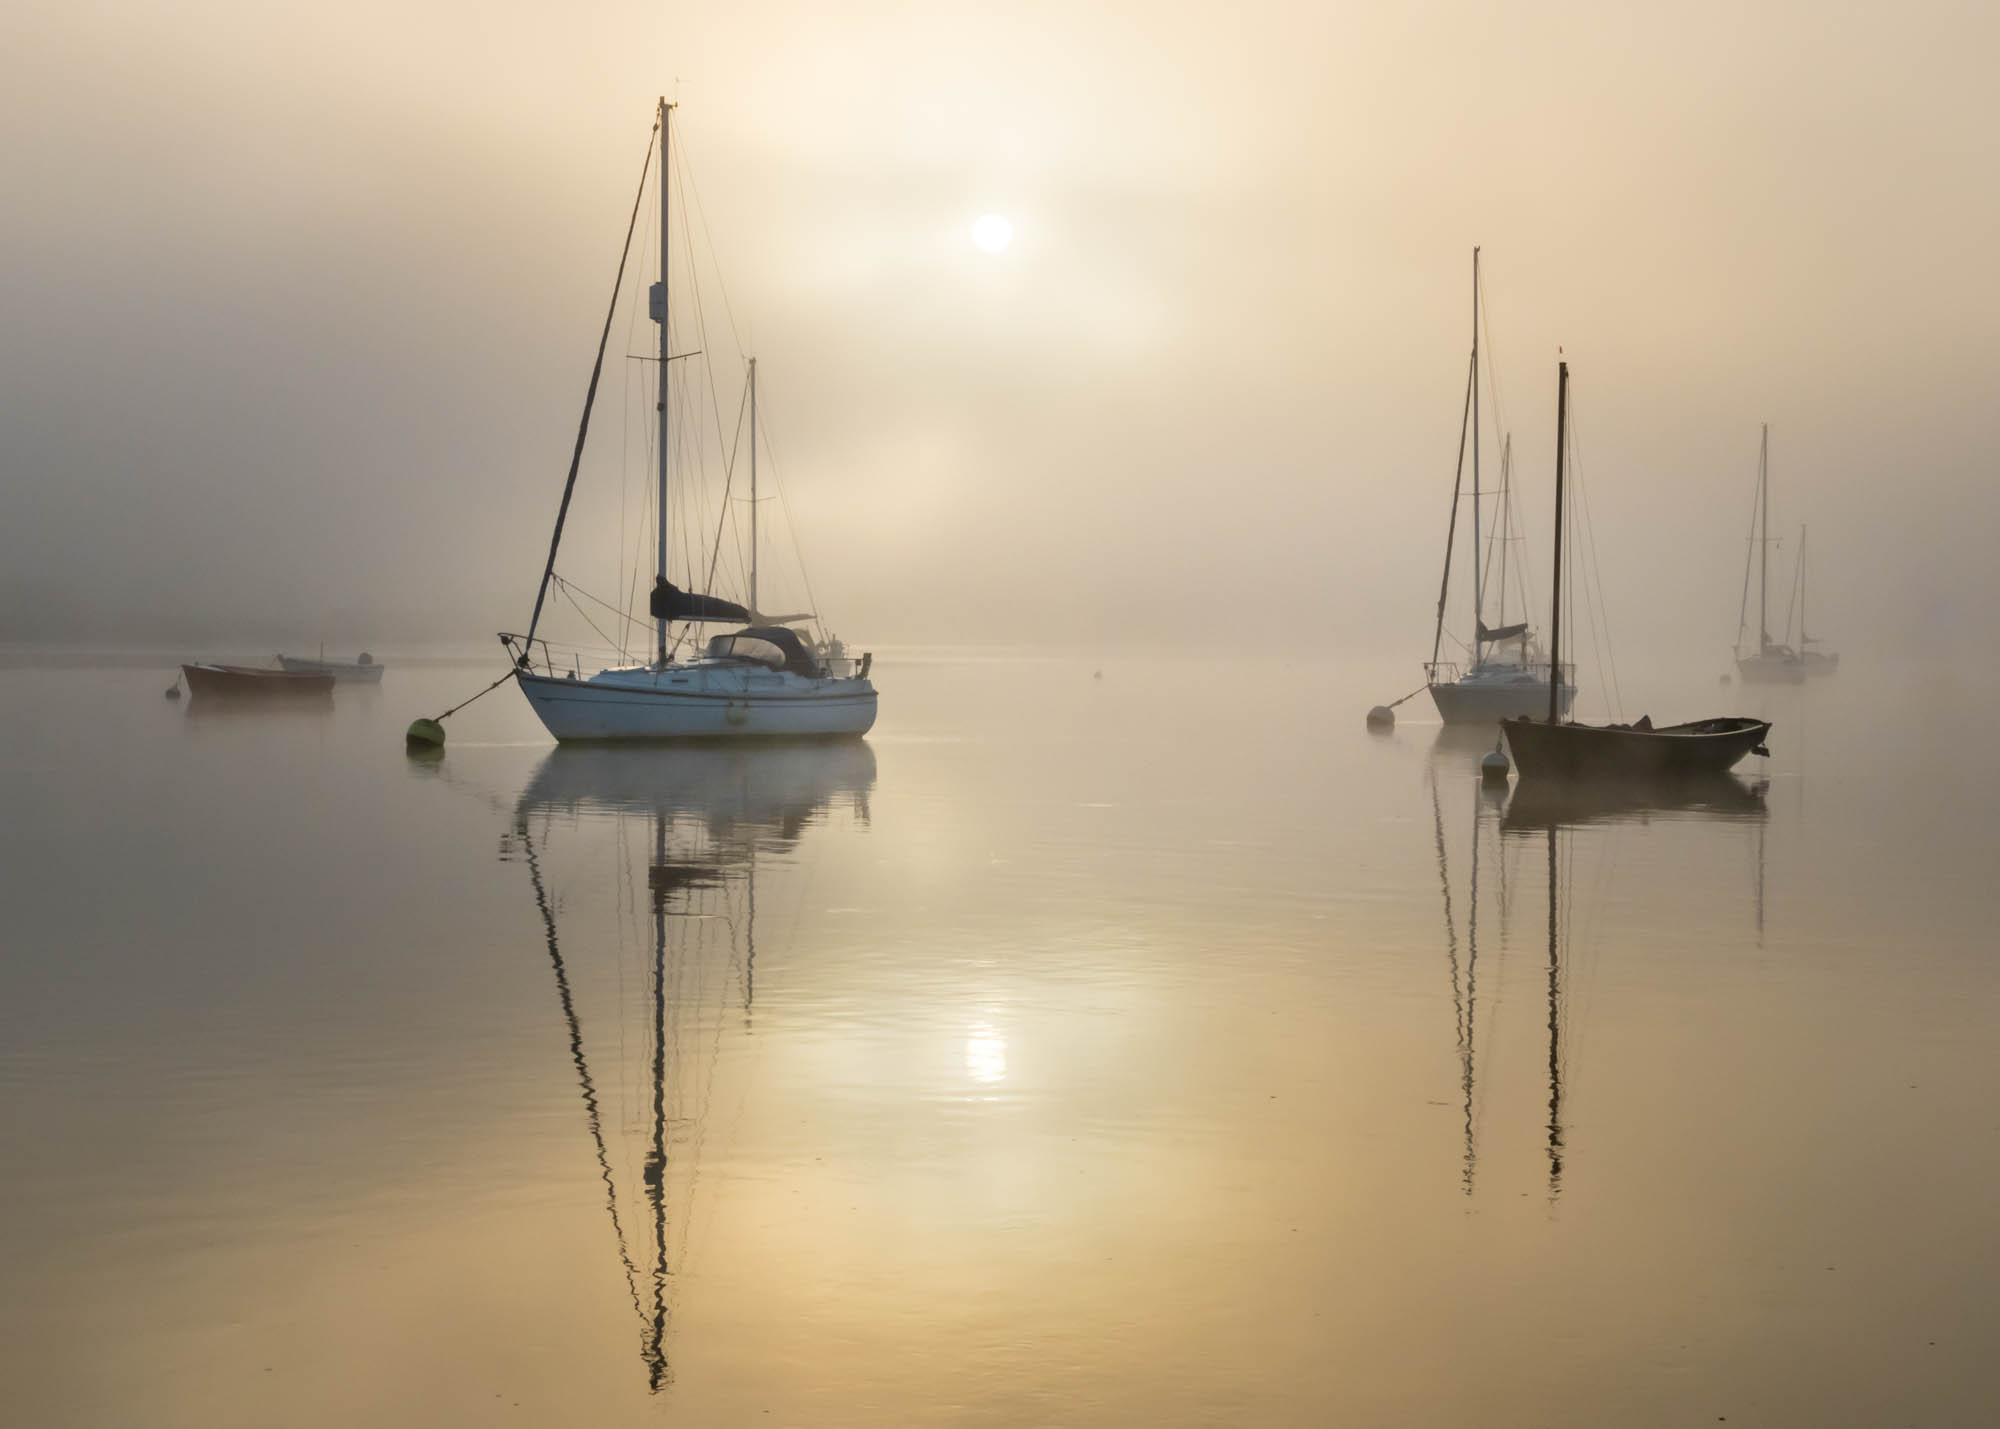  Mist At Sunrise By Mark Cresswell